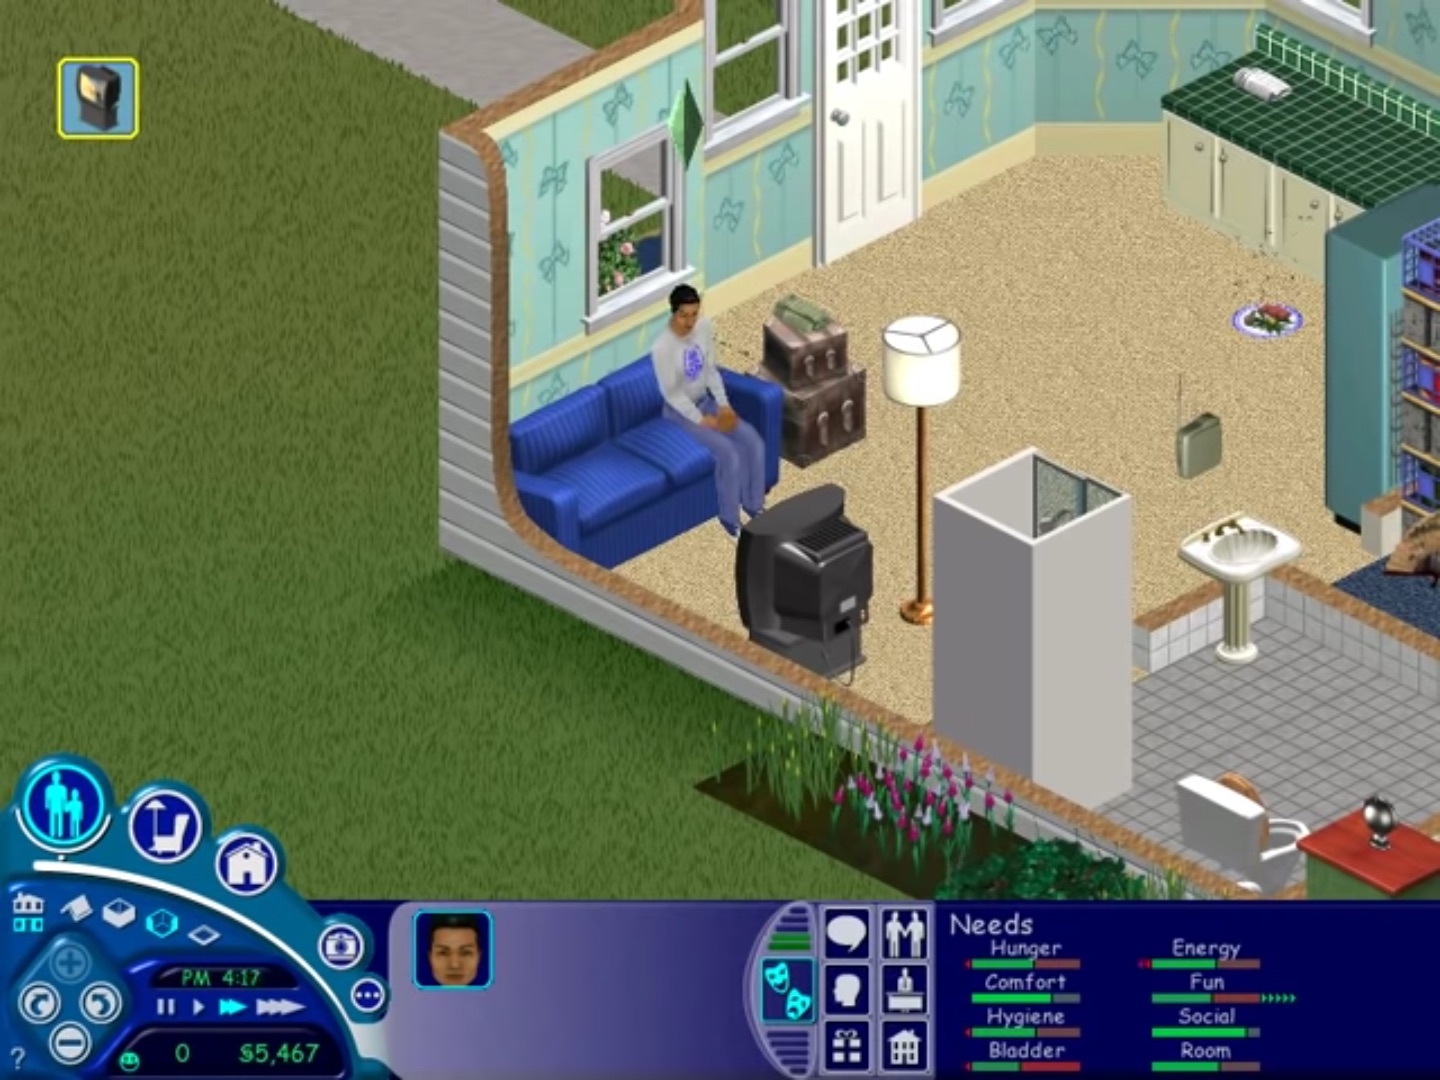 17 Computer Games All '00s Kids Played That Actually Taught You